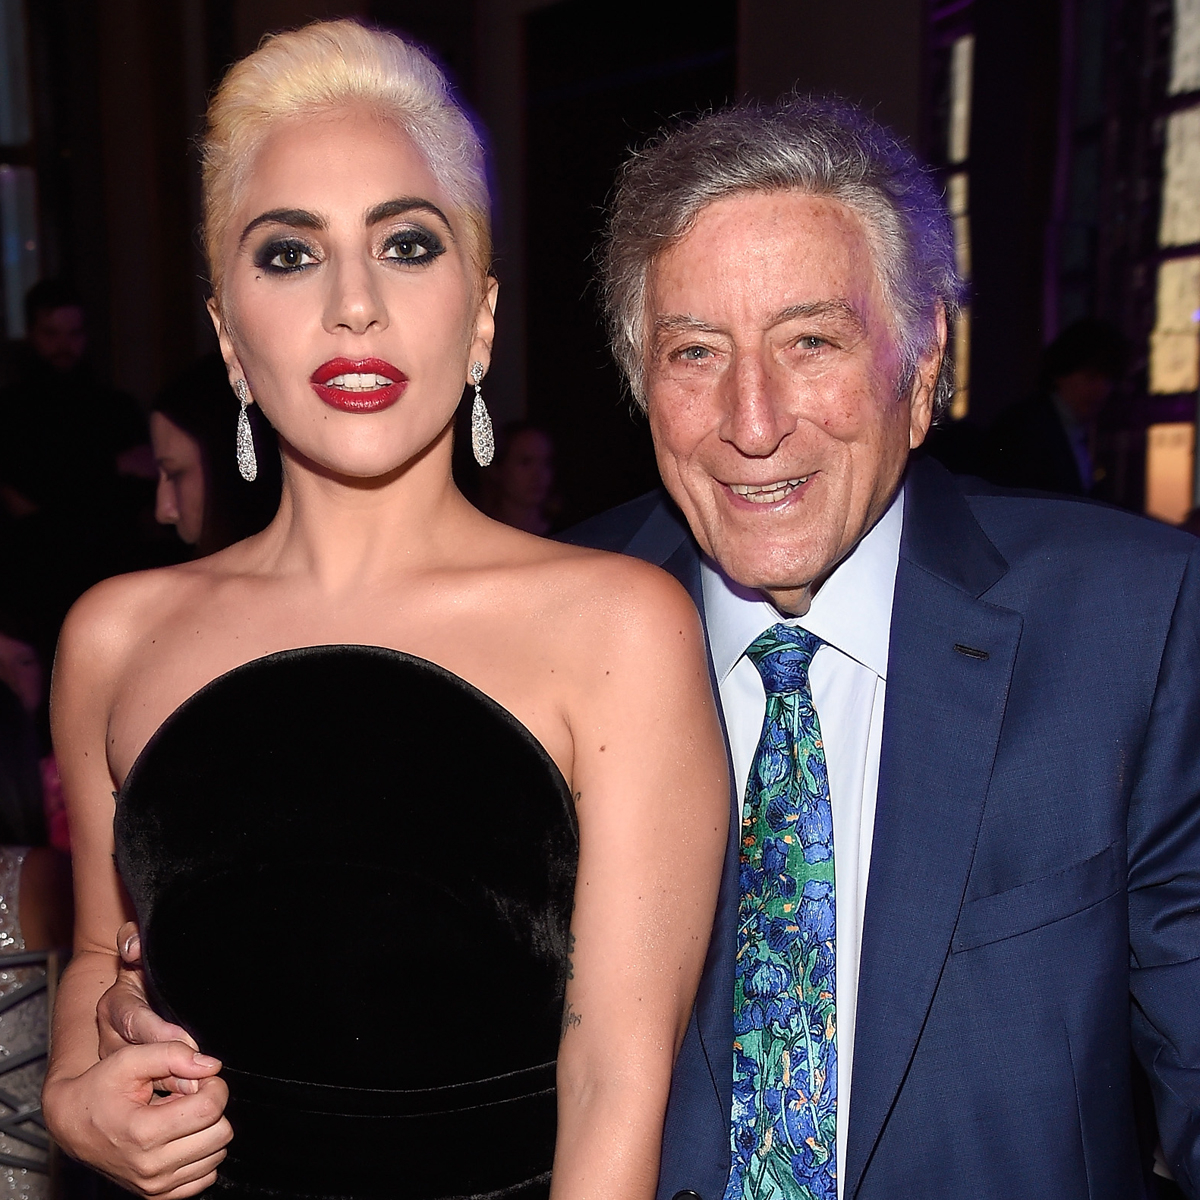 Lady Gaga Pays Tribute to Tony Bennett After His Death